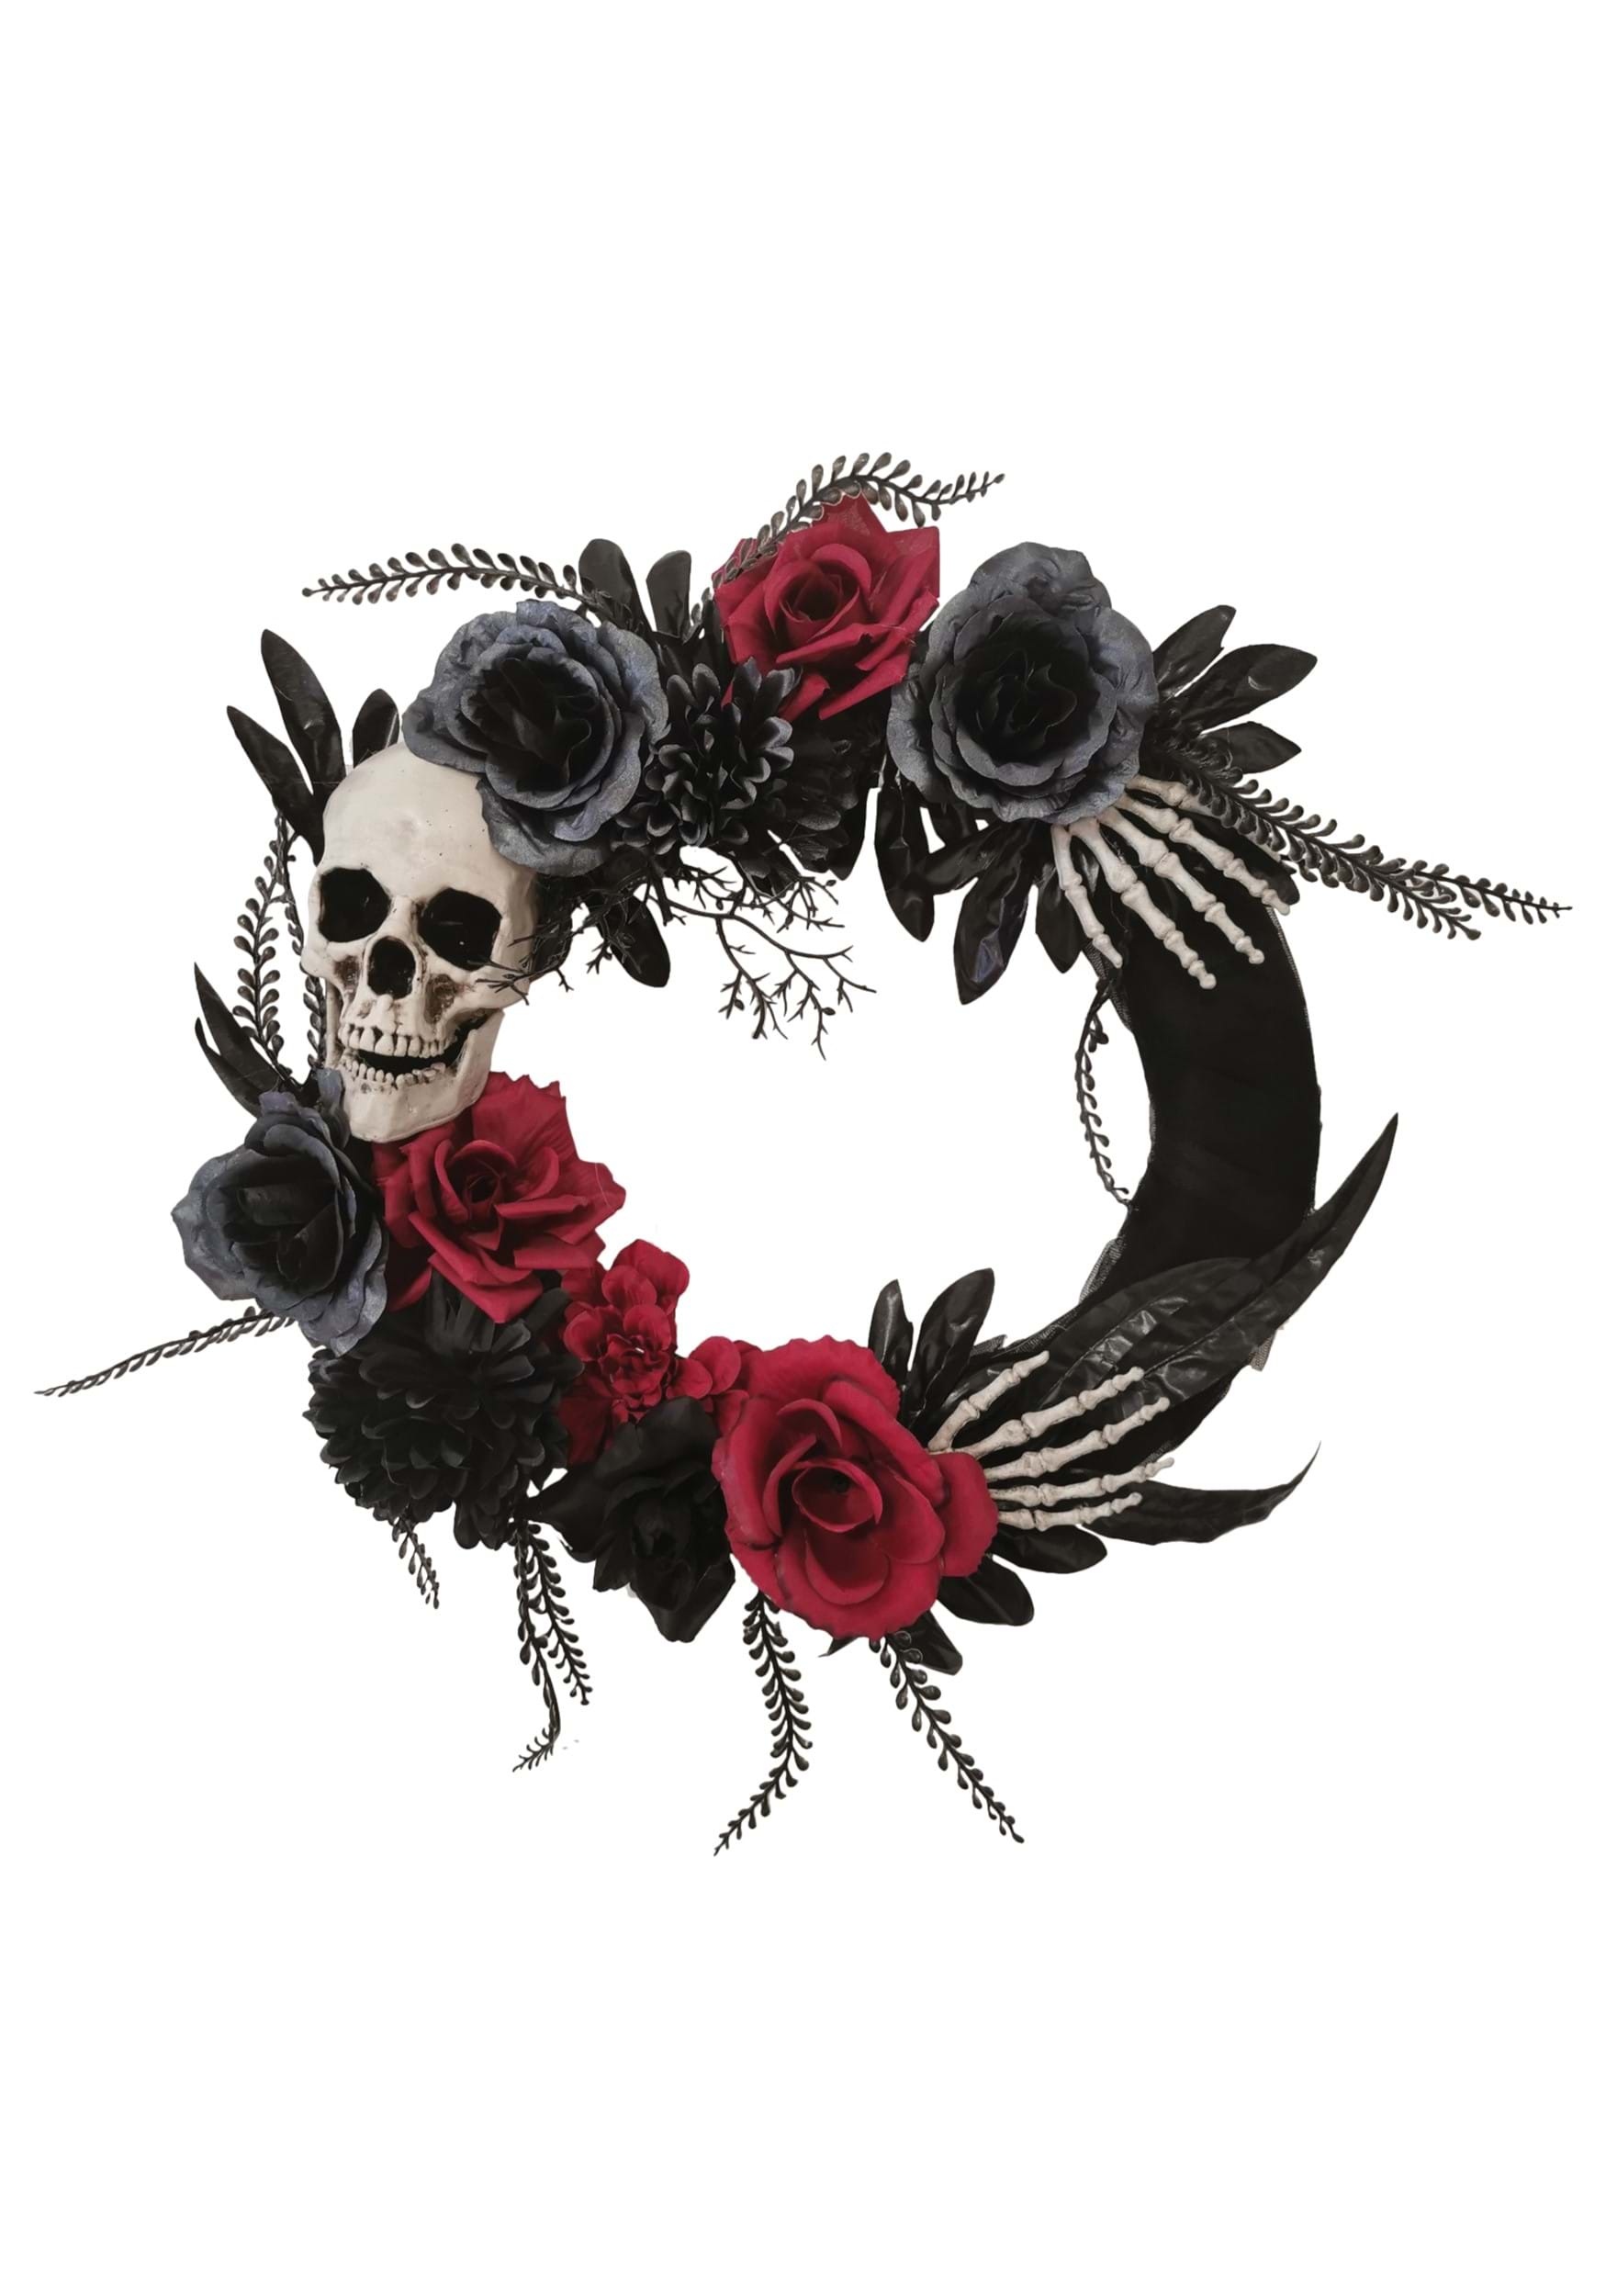 18″ Black Skull Wreath with Hands and Roses